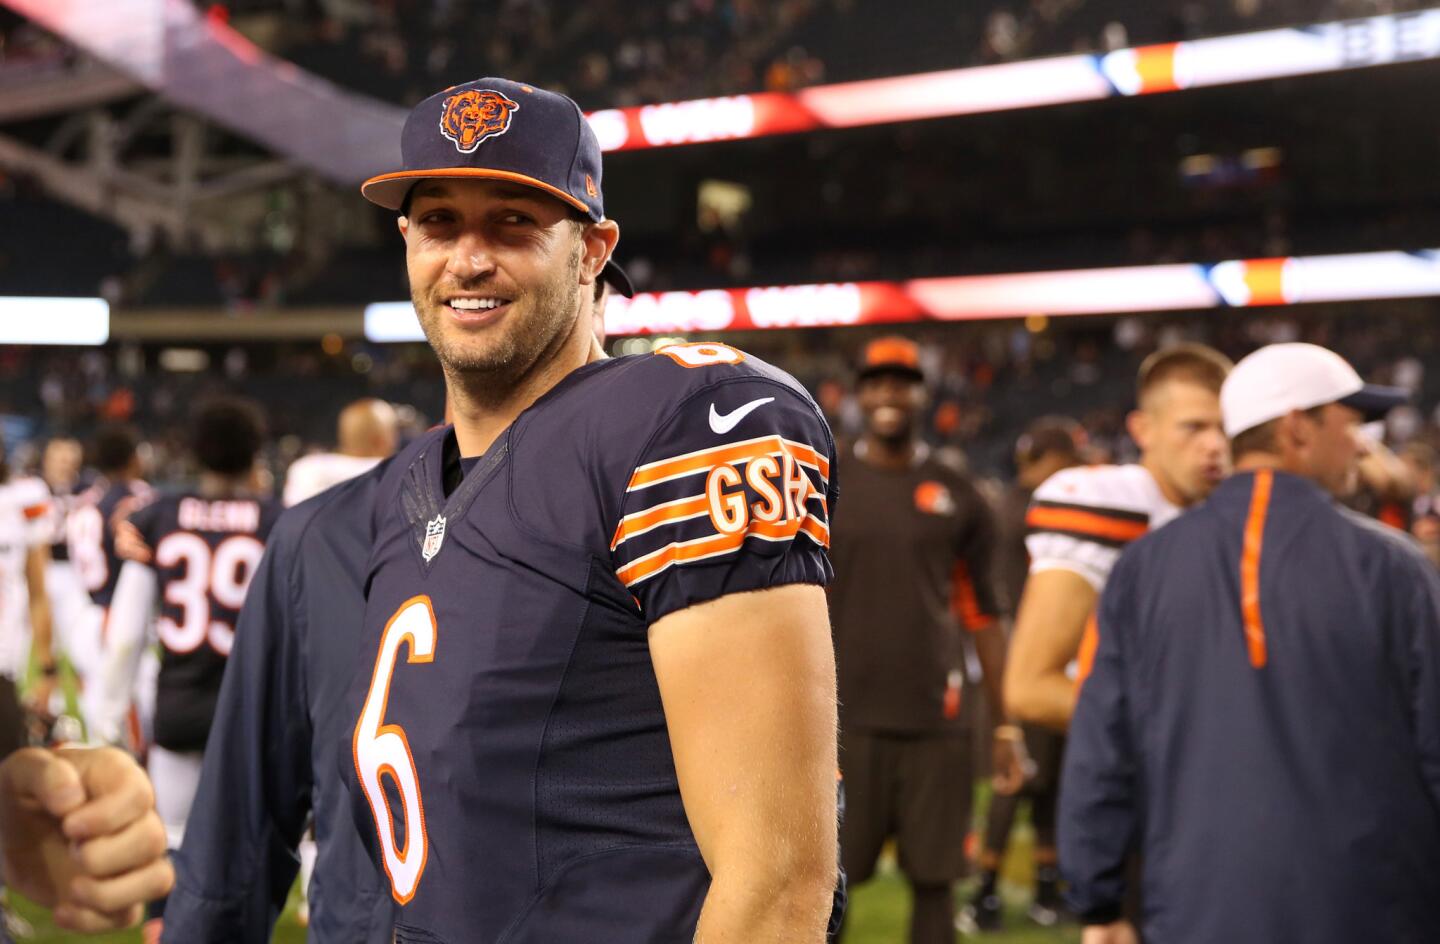 Bears quarterback Jay Cutler flashes a smile after a preseason game against the Browns at Soldier Field.